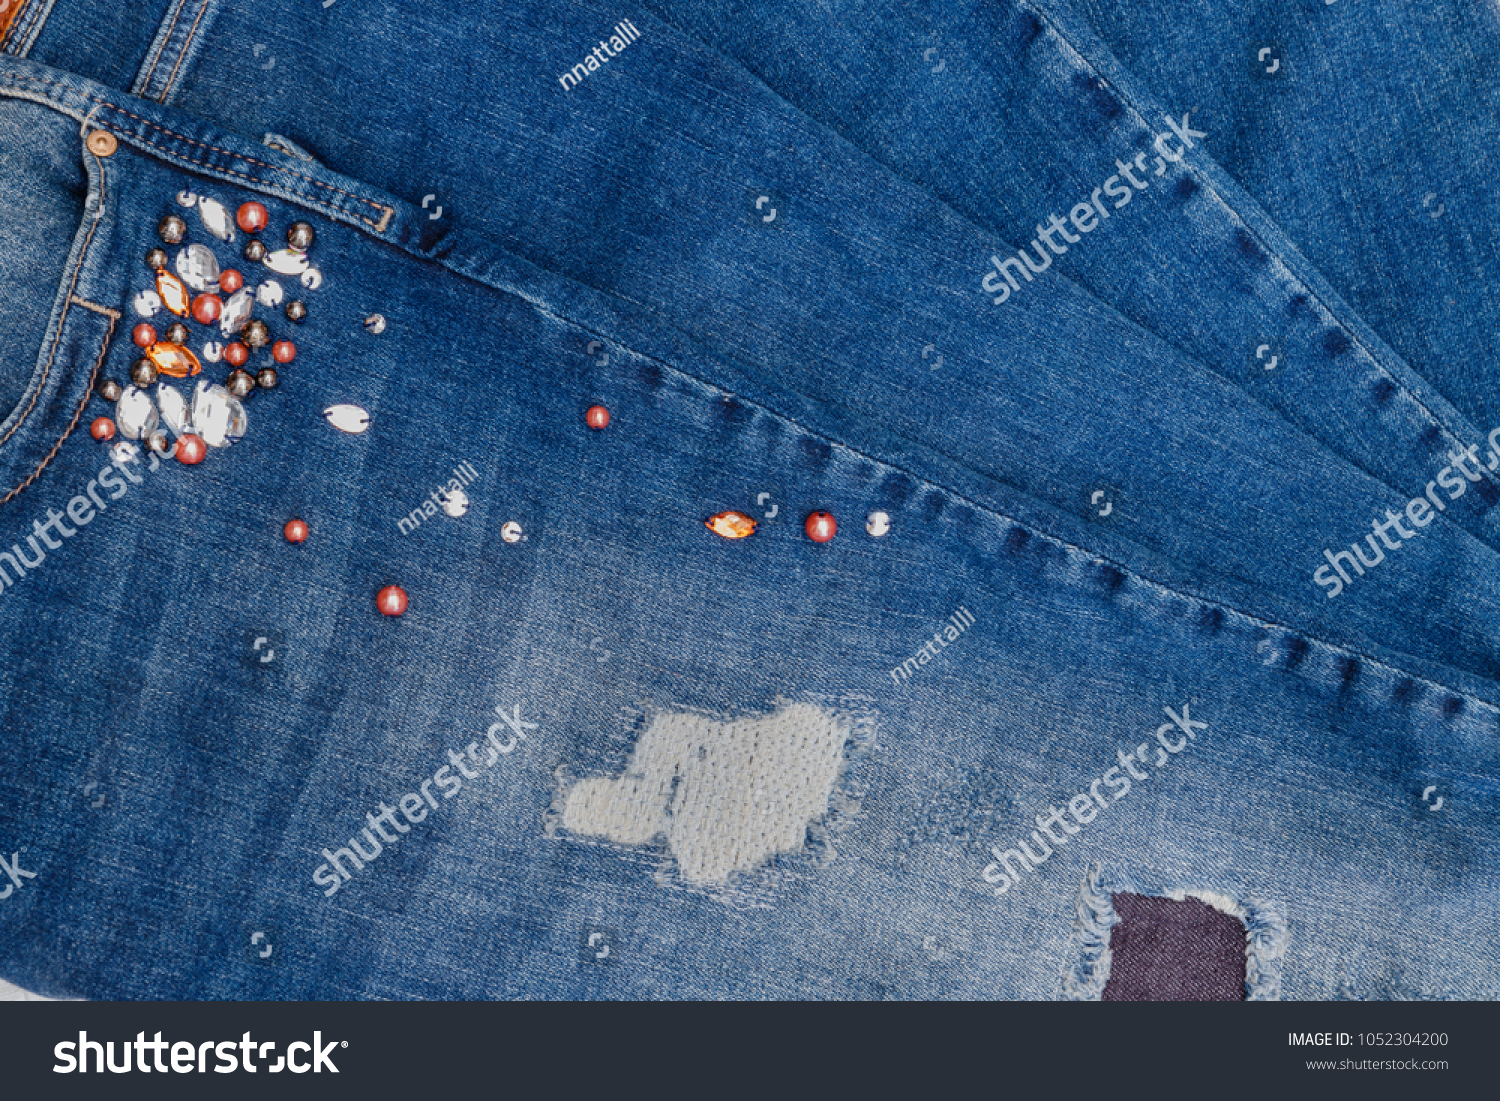 jeans with jeweled pockets